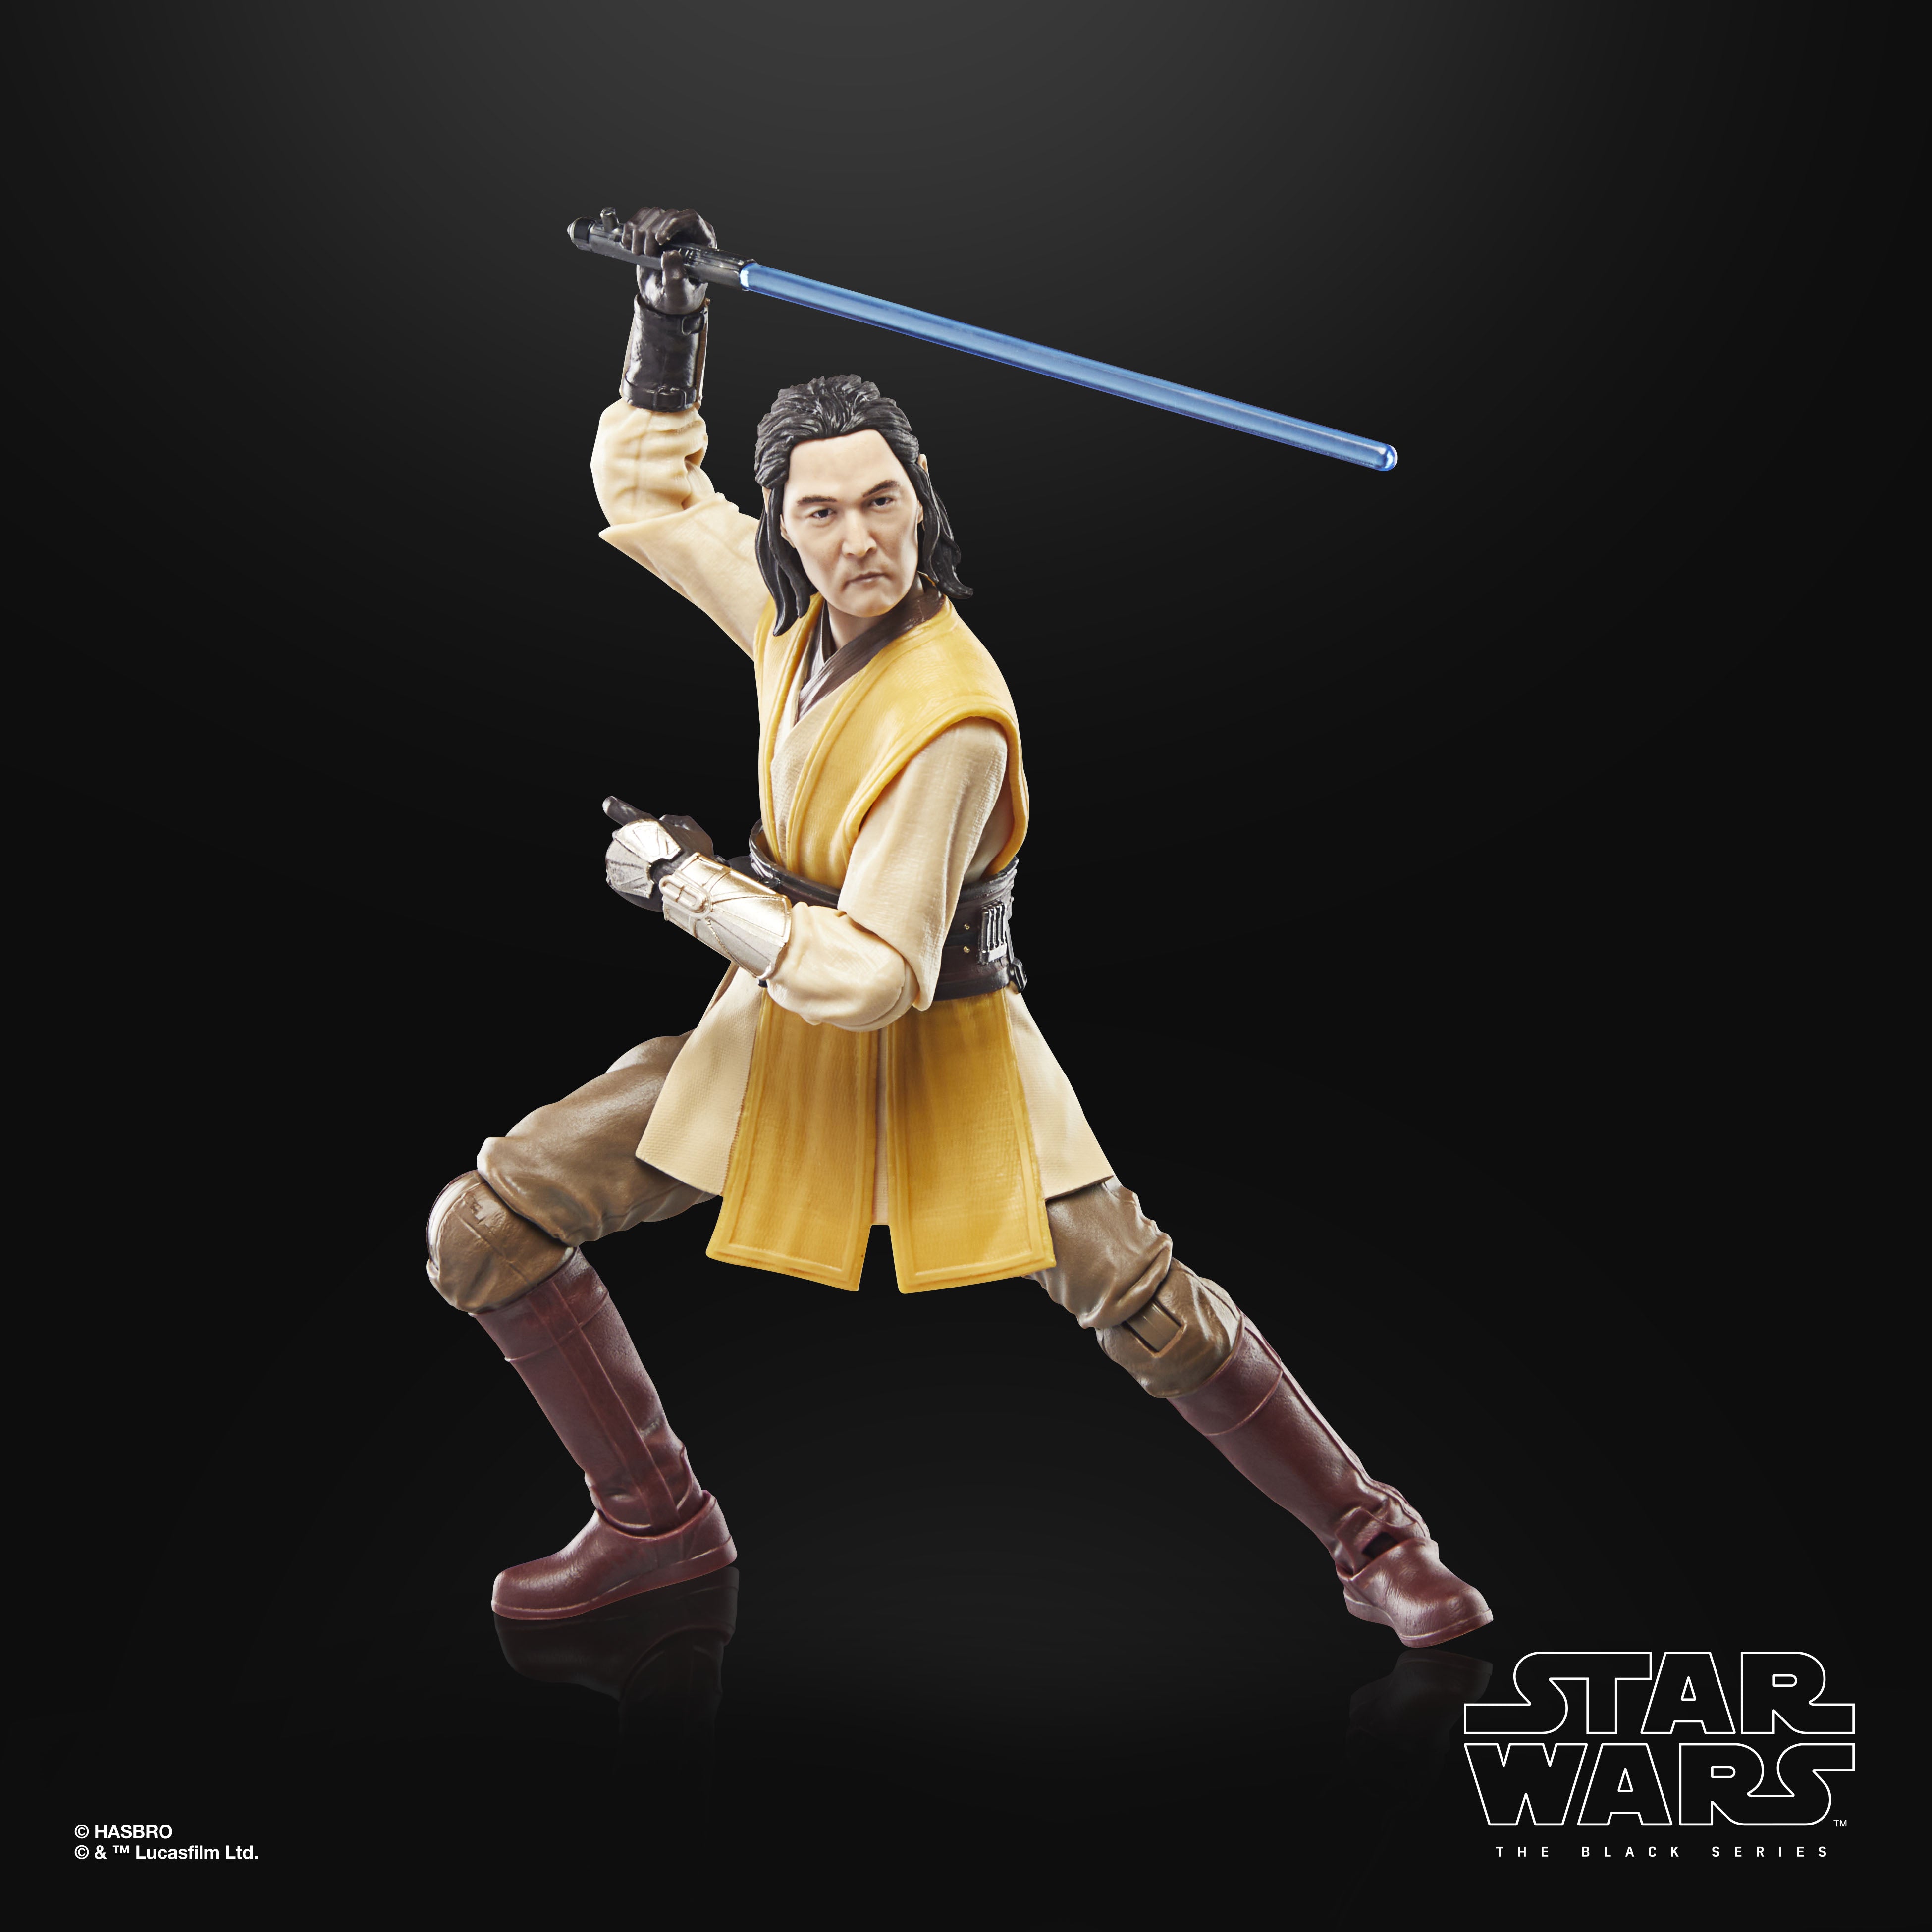 Star Wars The Black Series: The Acolyte - Jedi Master Sol